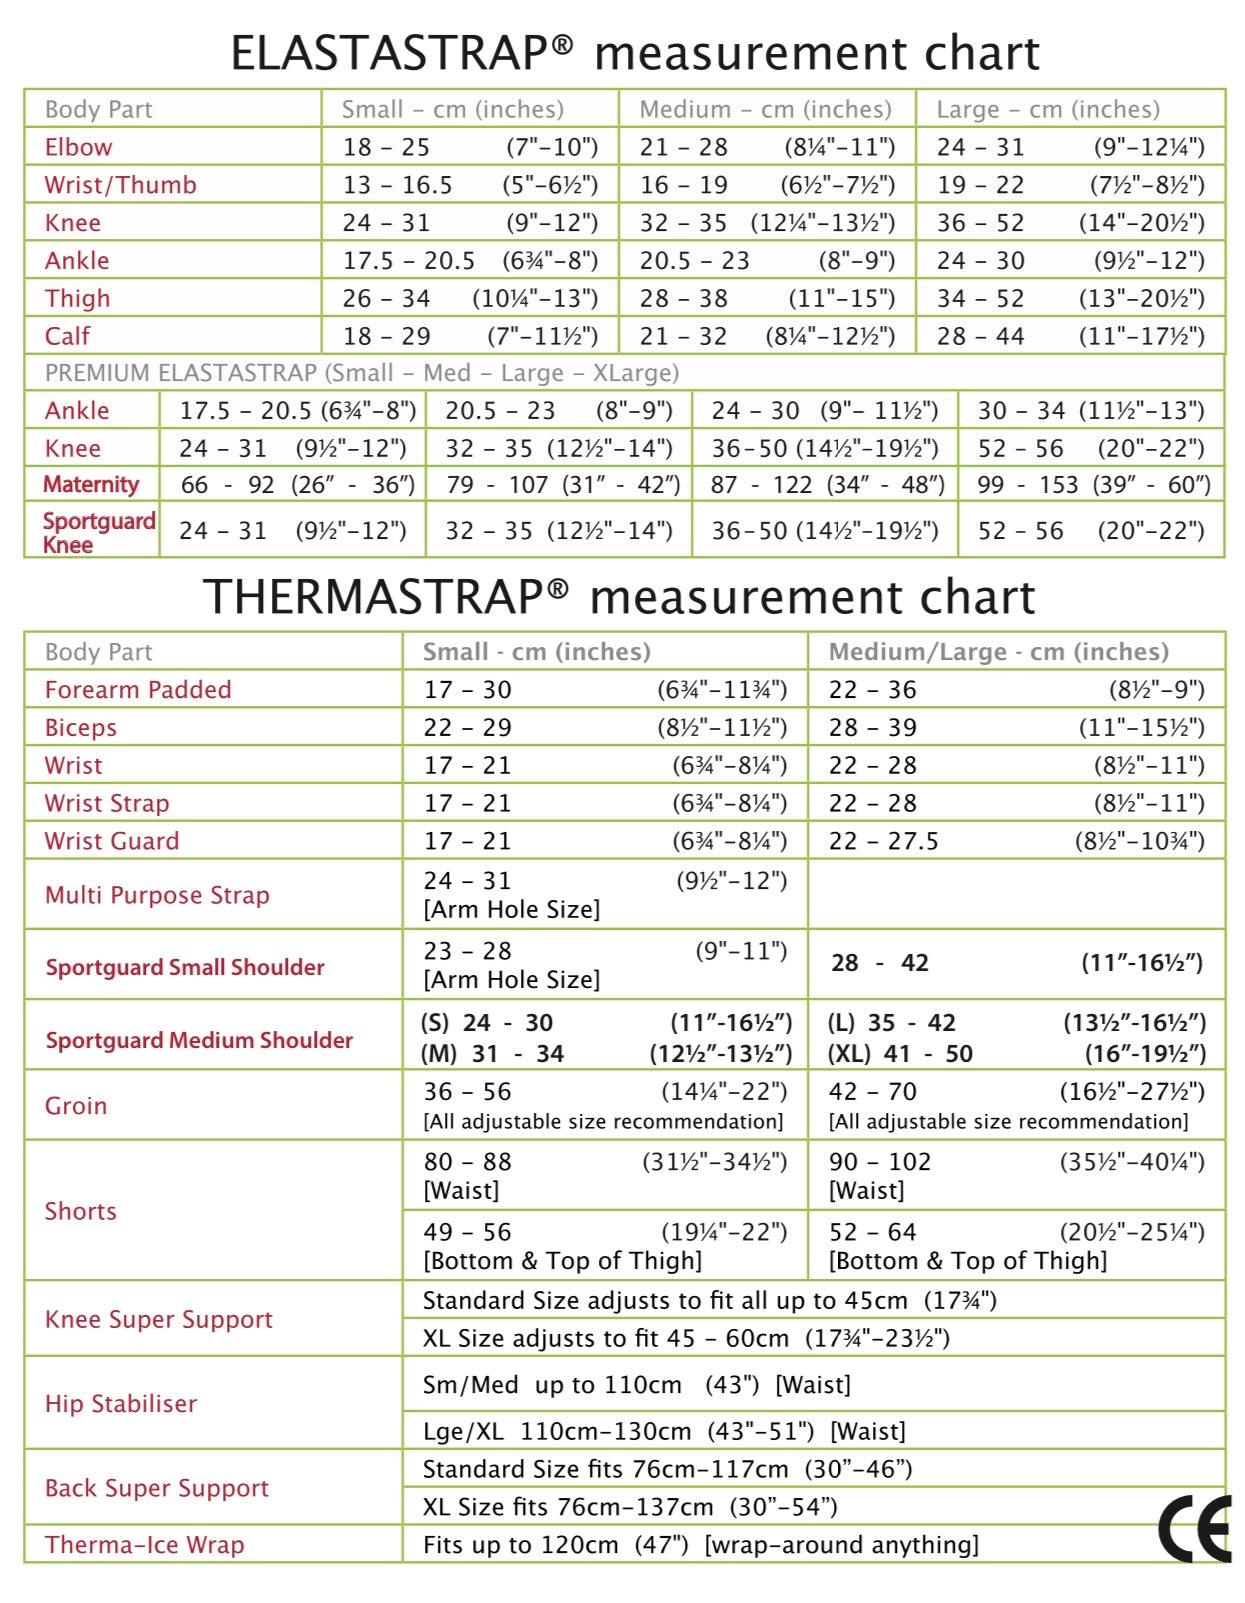 Thermastrap Ankle/Foot Support 3mm